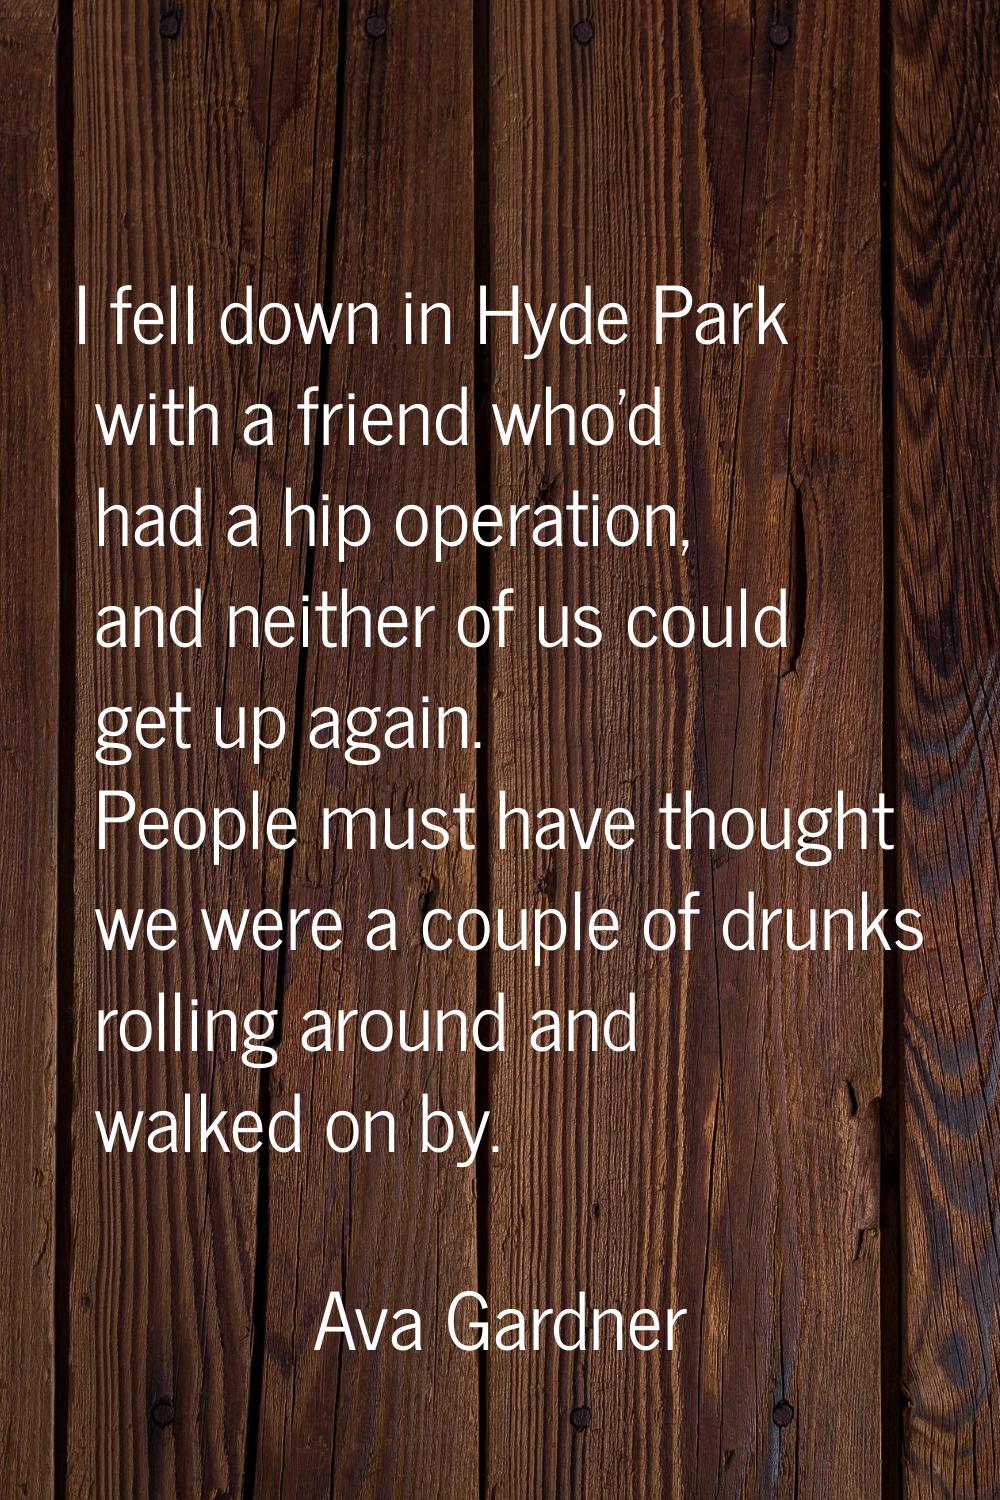 I fell down in Hyde Park with a friend who'd had a hip operation, and neither of us could get up ag